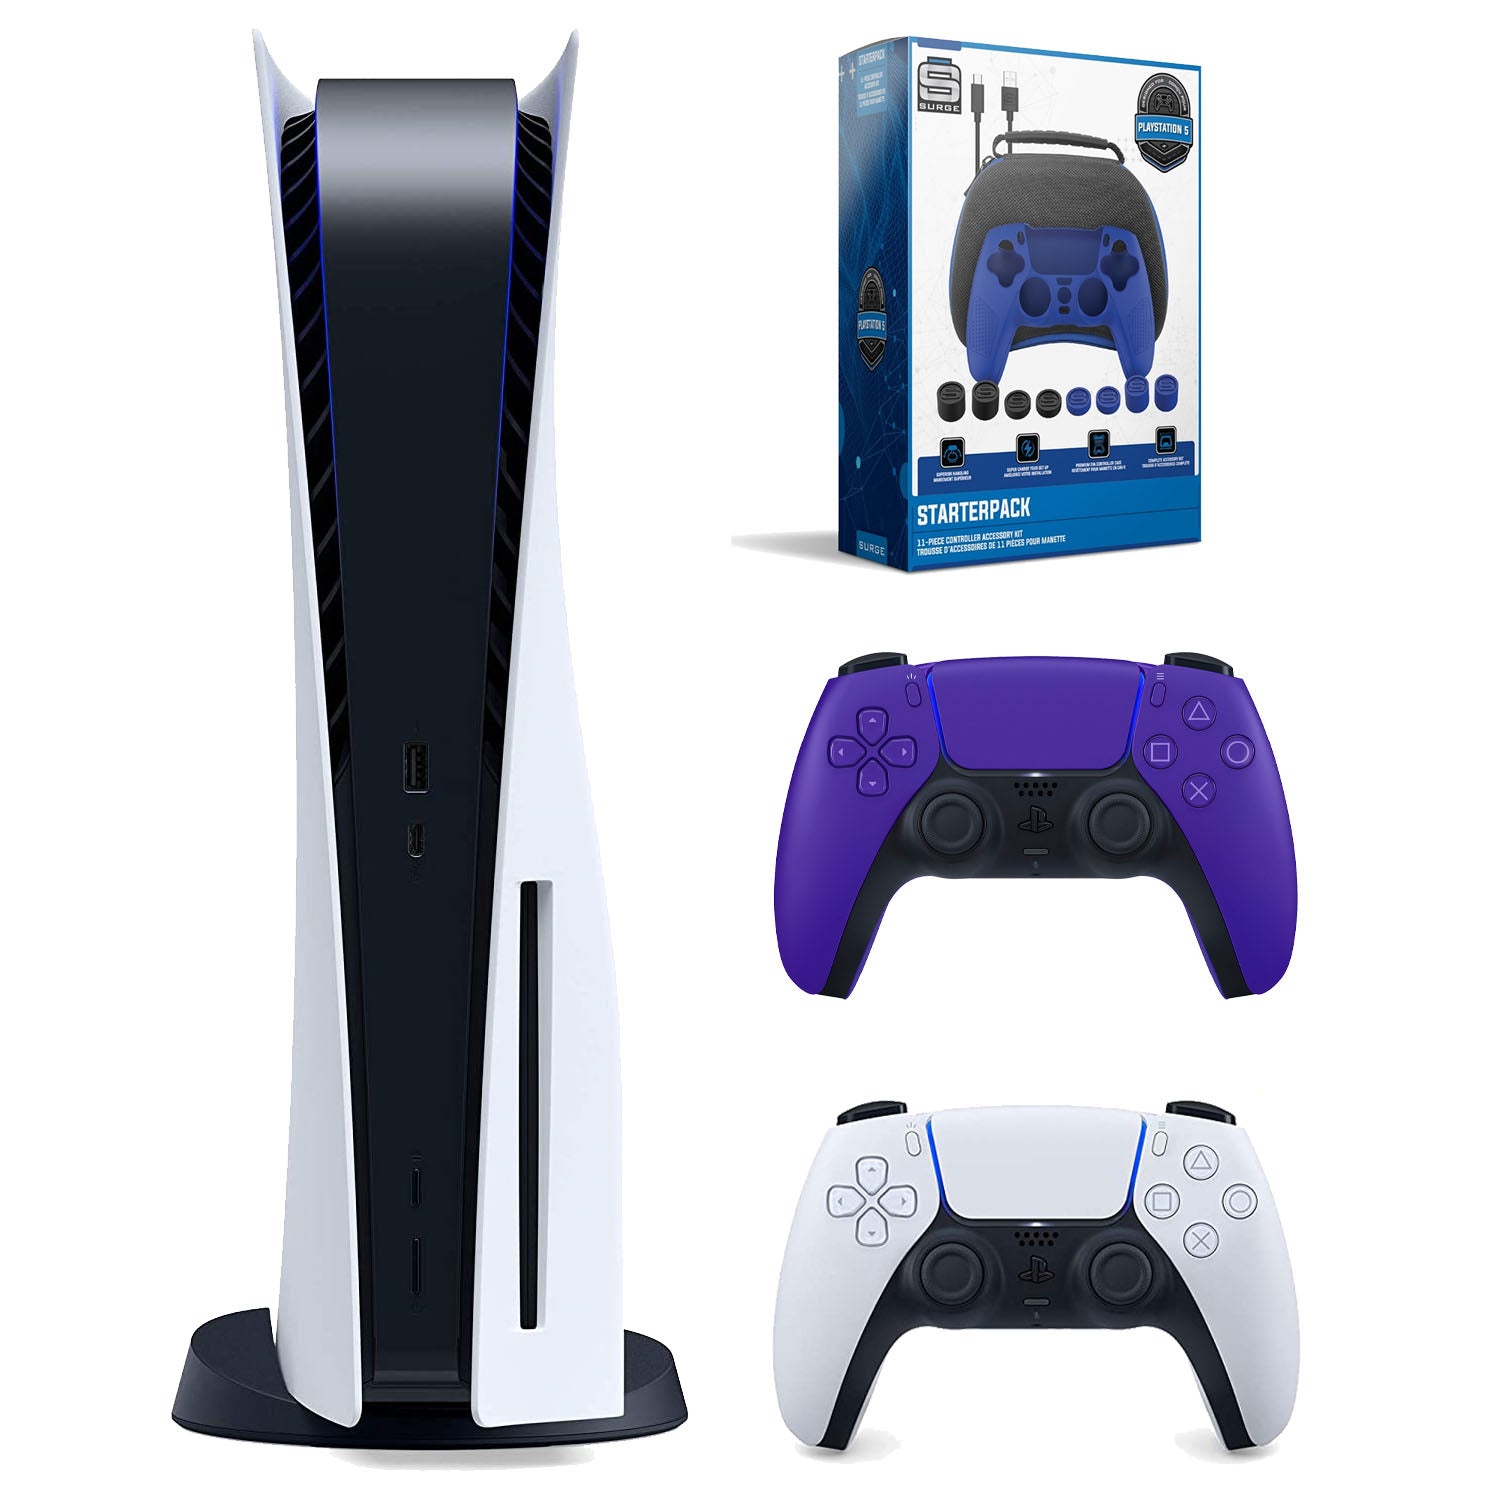 Sony Playstation 5 Disc Version Console (Japan Import) with Extra Purple Controller and Surge Pro Gamer Starter Pack 11-Piece Accessory Kit - Pro-Distributing